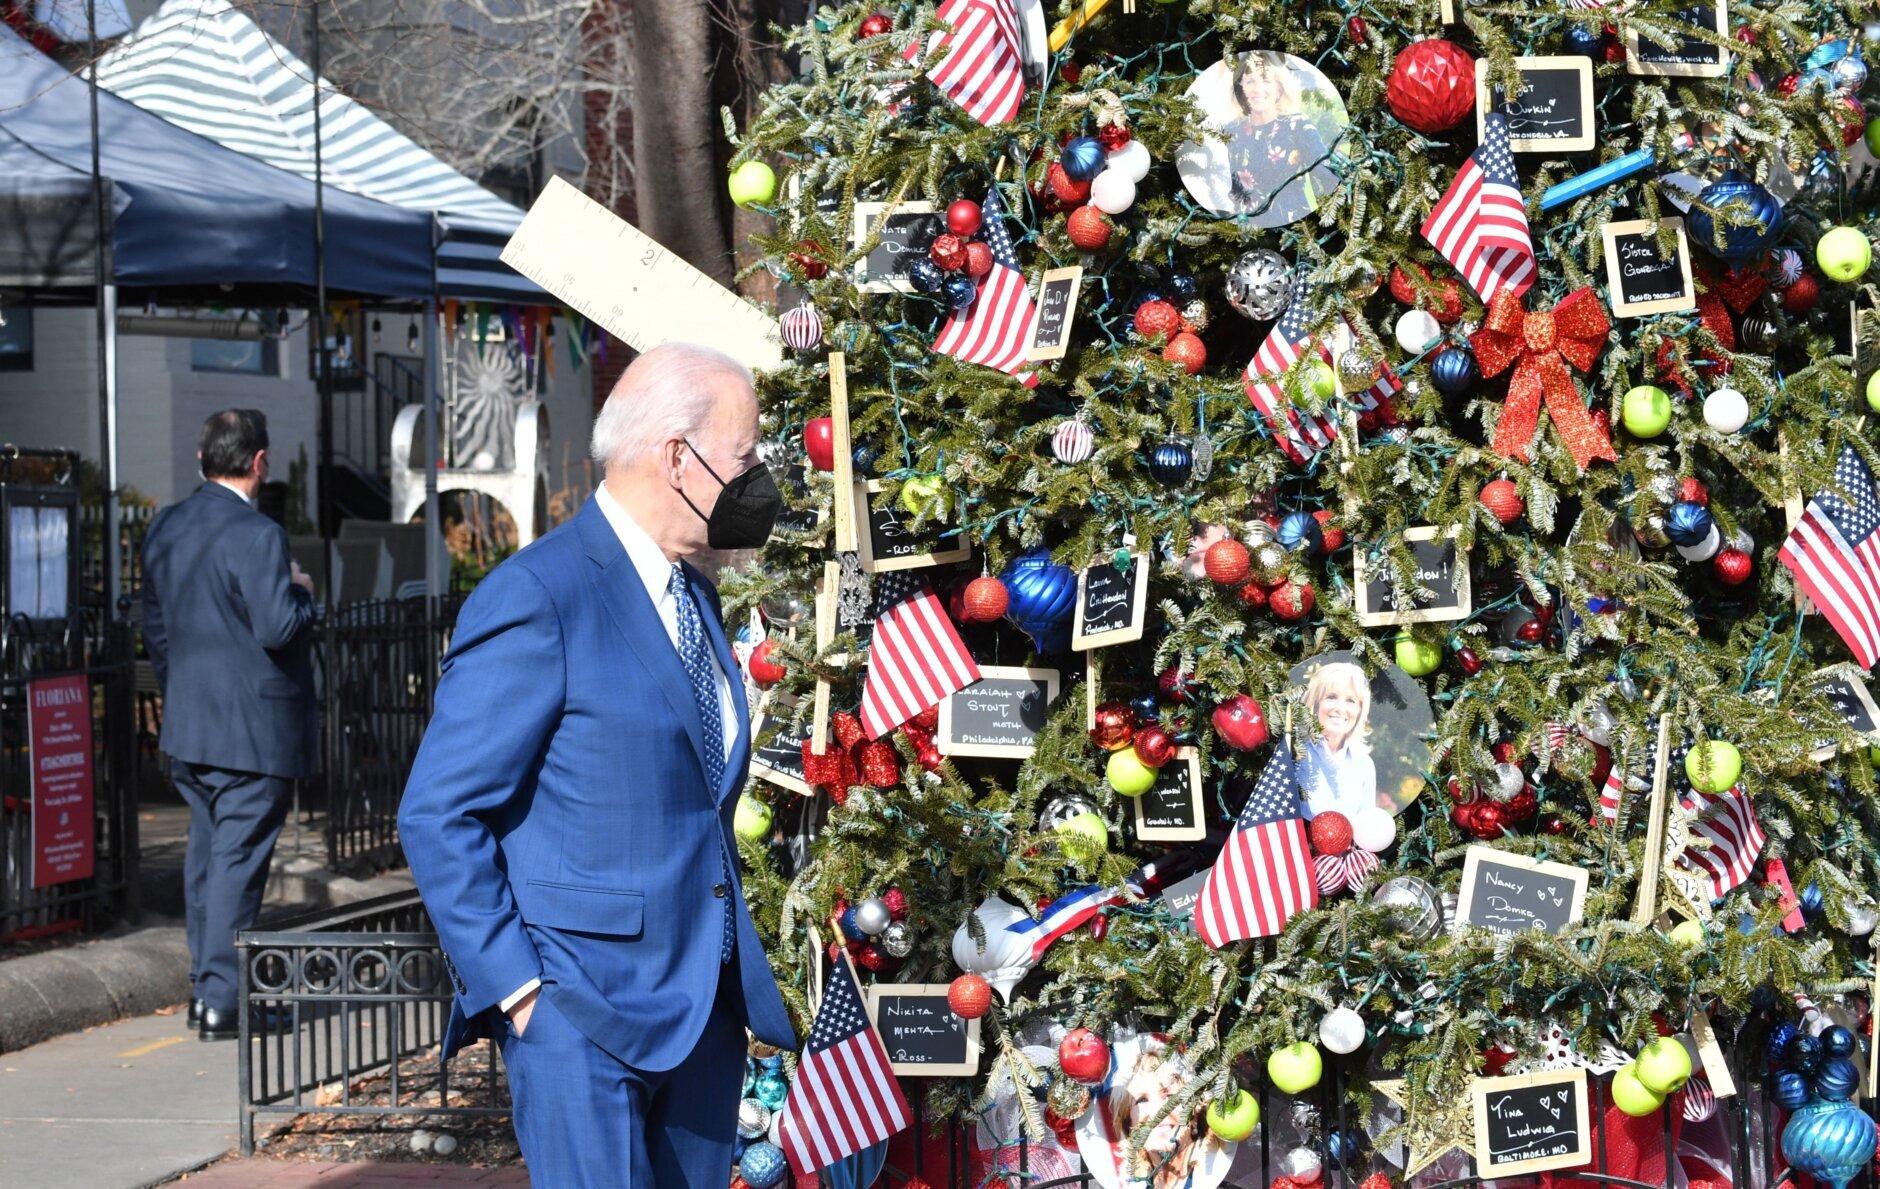 US President Joe Biden visits the Christmas Tree in honor of First Lady Jill Biden outside Floriana Italian Restaurant in Washington, DC, on December 24, 2021. (Photo by Nicholas Kamm / AFP) (Photo by NICHOLAS KAMM/AFP via Getty Images)